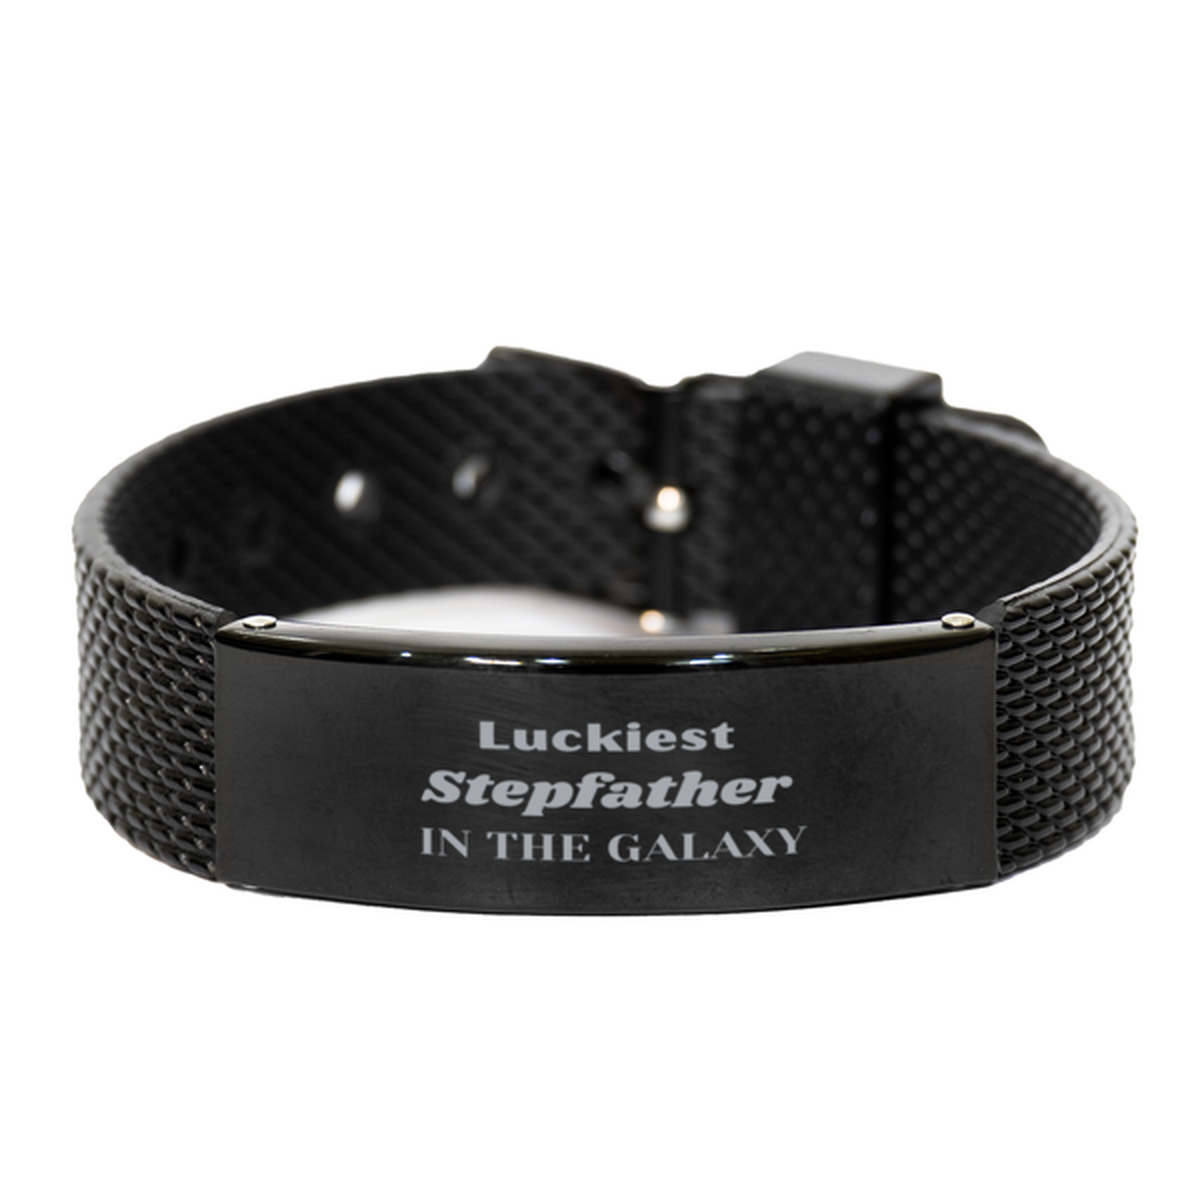 Luckiest Stepfather in the Galaxy, To My Stepfather Engraved Gifts, Christmas Stepfather Black Shark Mesh Bracelet Gifts, X-mas Birthday Unique Gifts For Stepfather Men Women